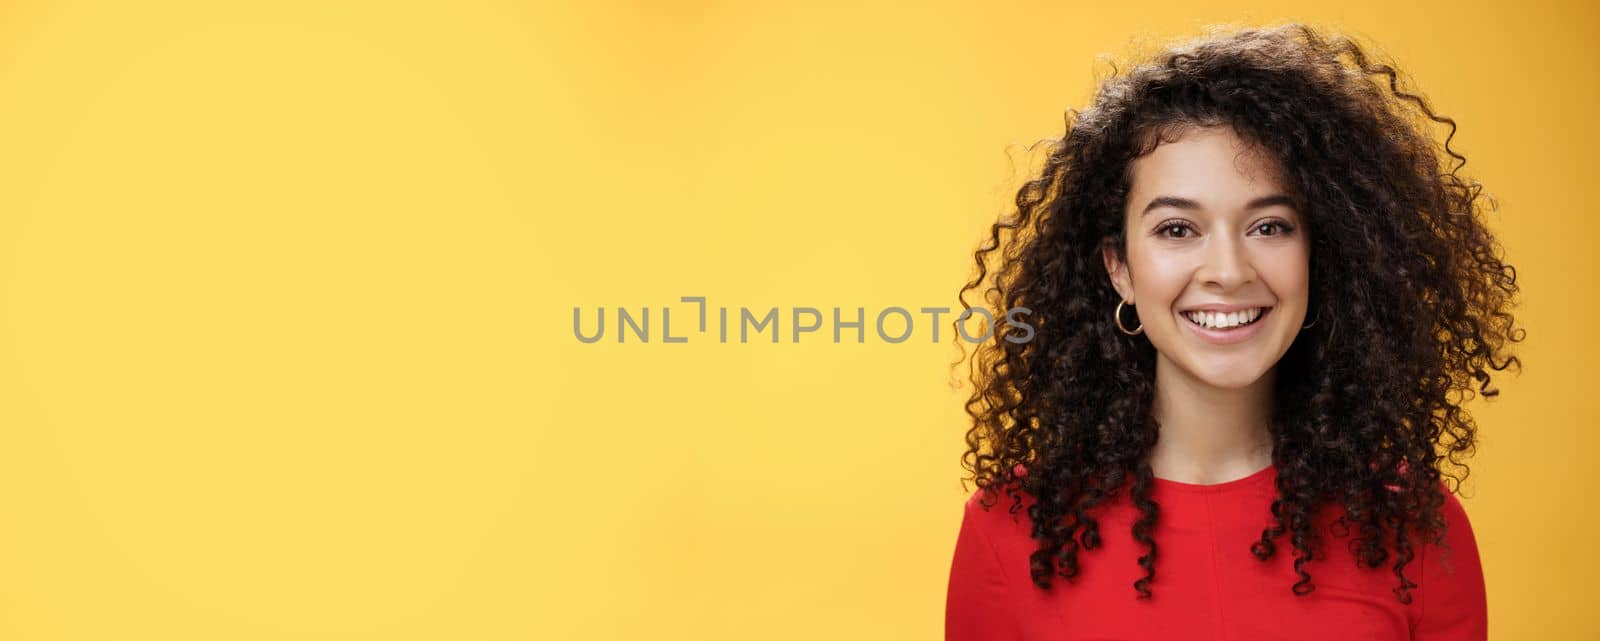 Close-up shot of pretty caucasian girl with curly hair in red dress and earrings smiling joyfully with pleased hopeful expression gazing at camera carefree, posing over yellow background.